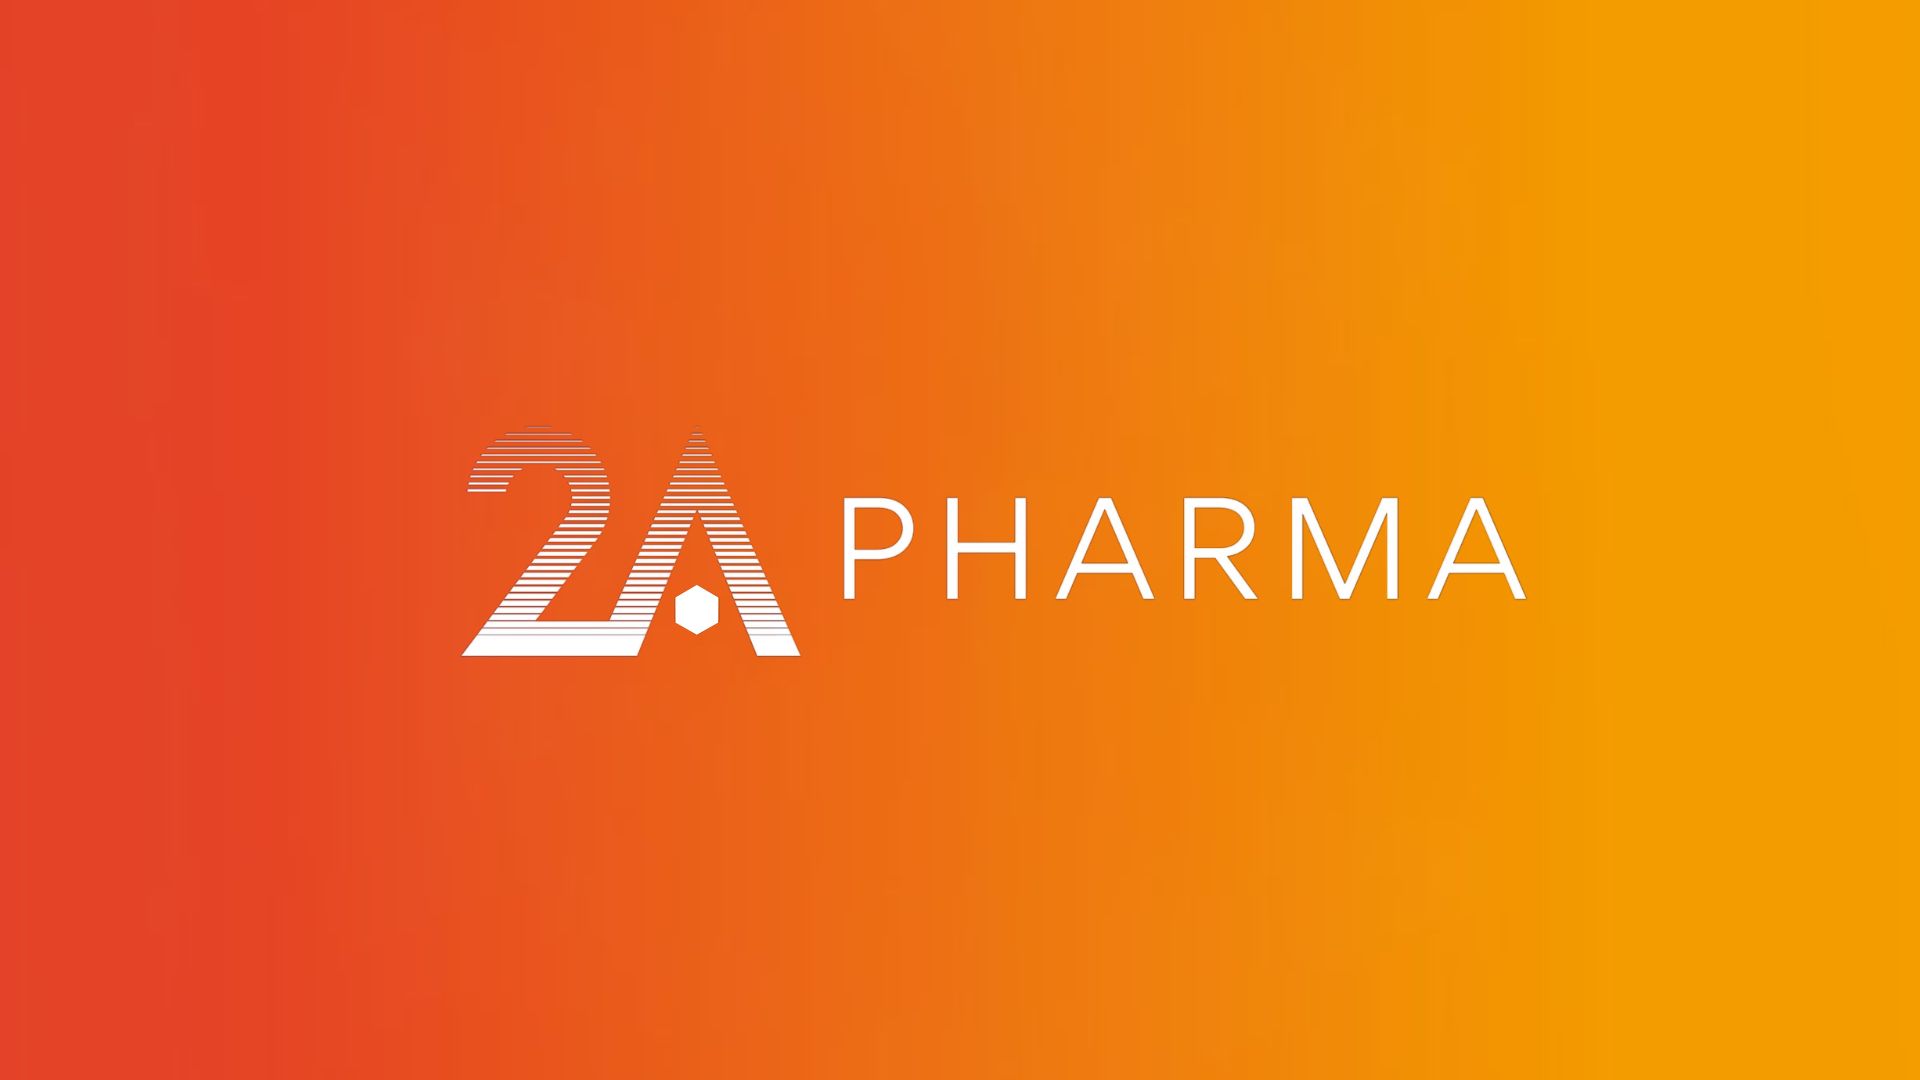 Press release: 2A Pharma AB raises SEK 27 million and signs exclusive worldwide license agreement